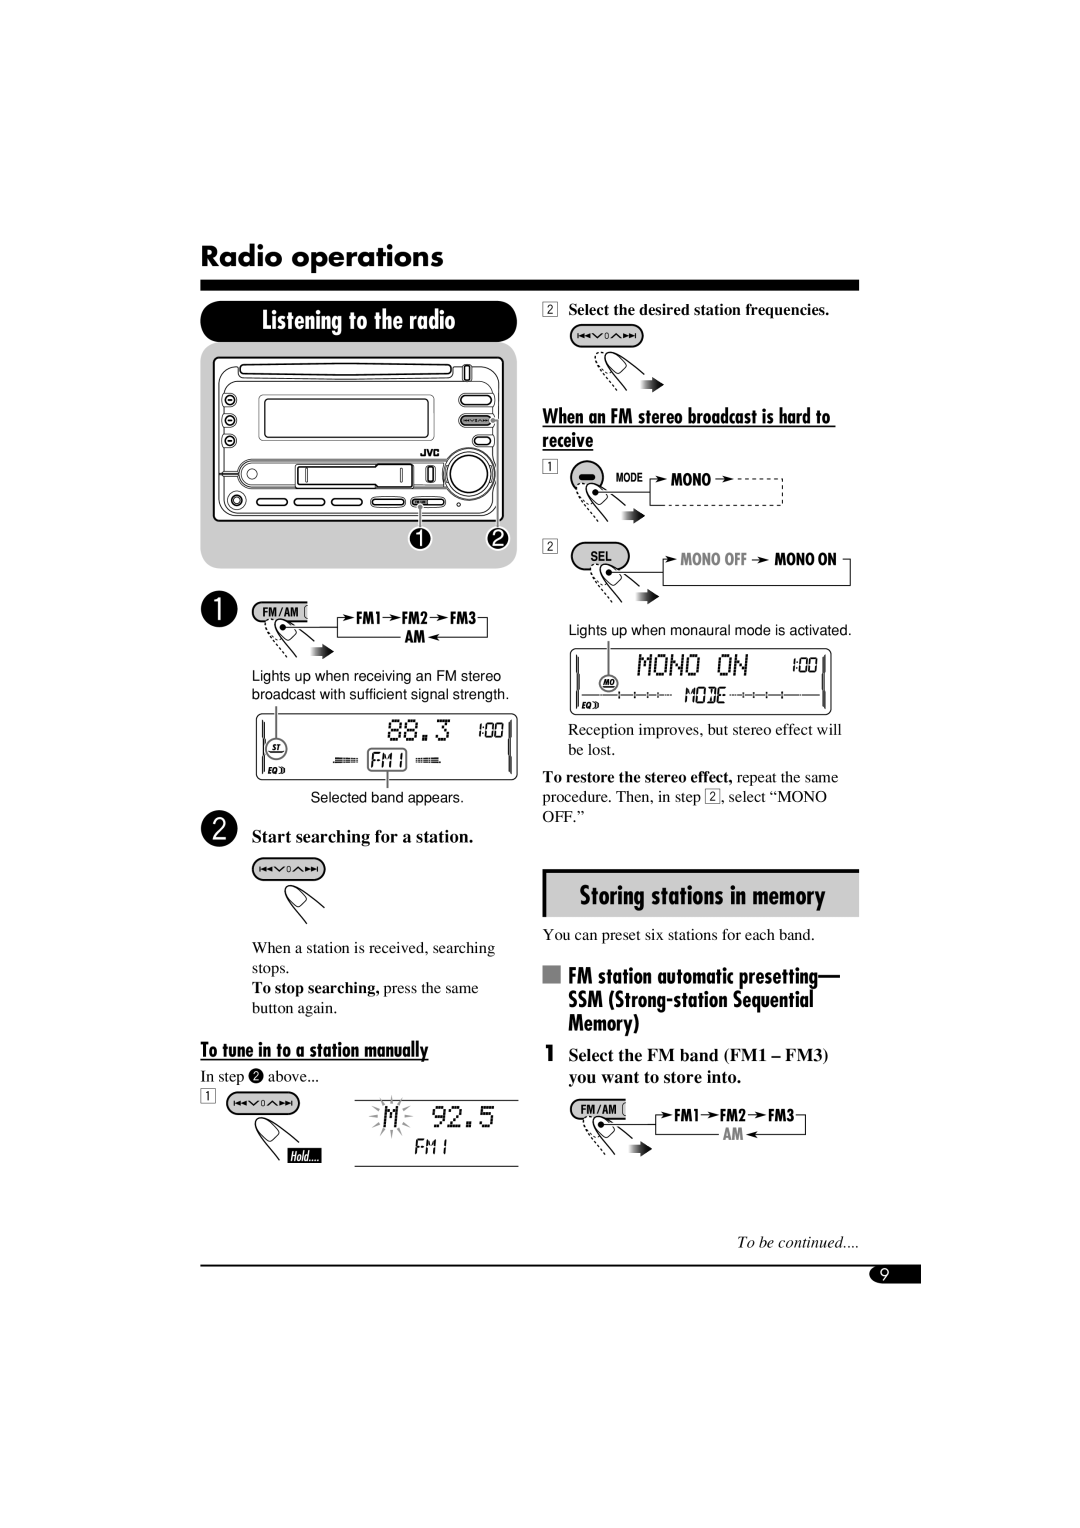 JVC W-XC406 manual Radio operations, Listening to the radio, Storing stations in memory, FM station automatic presetting 